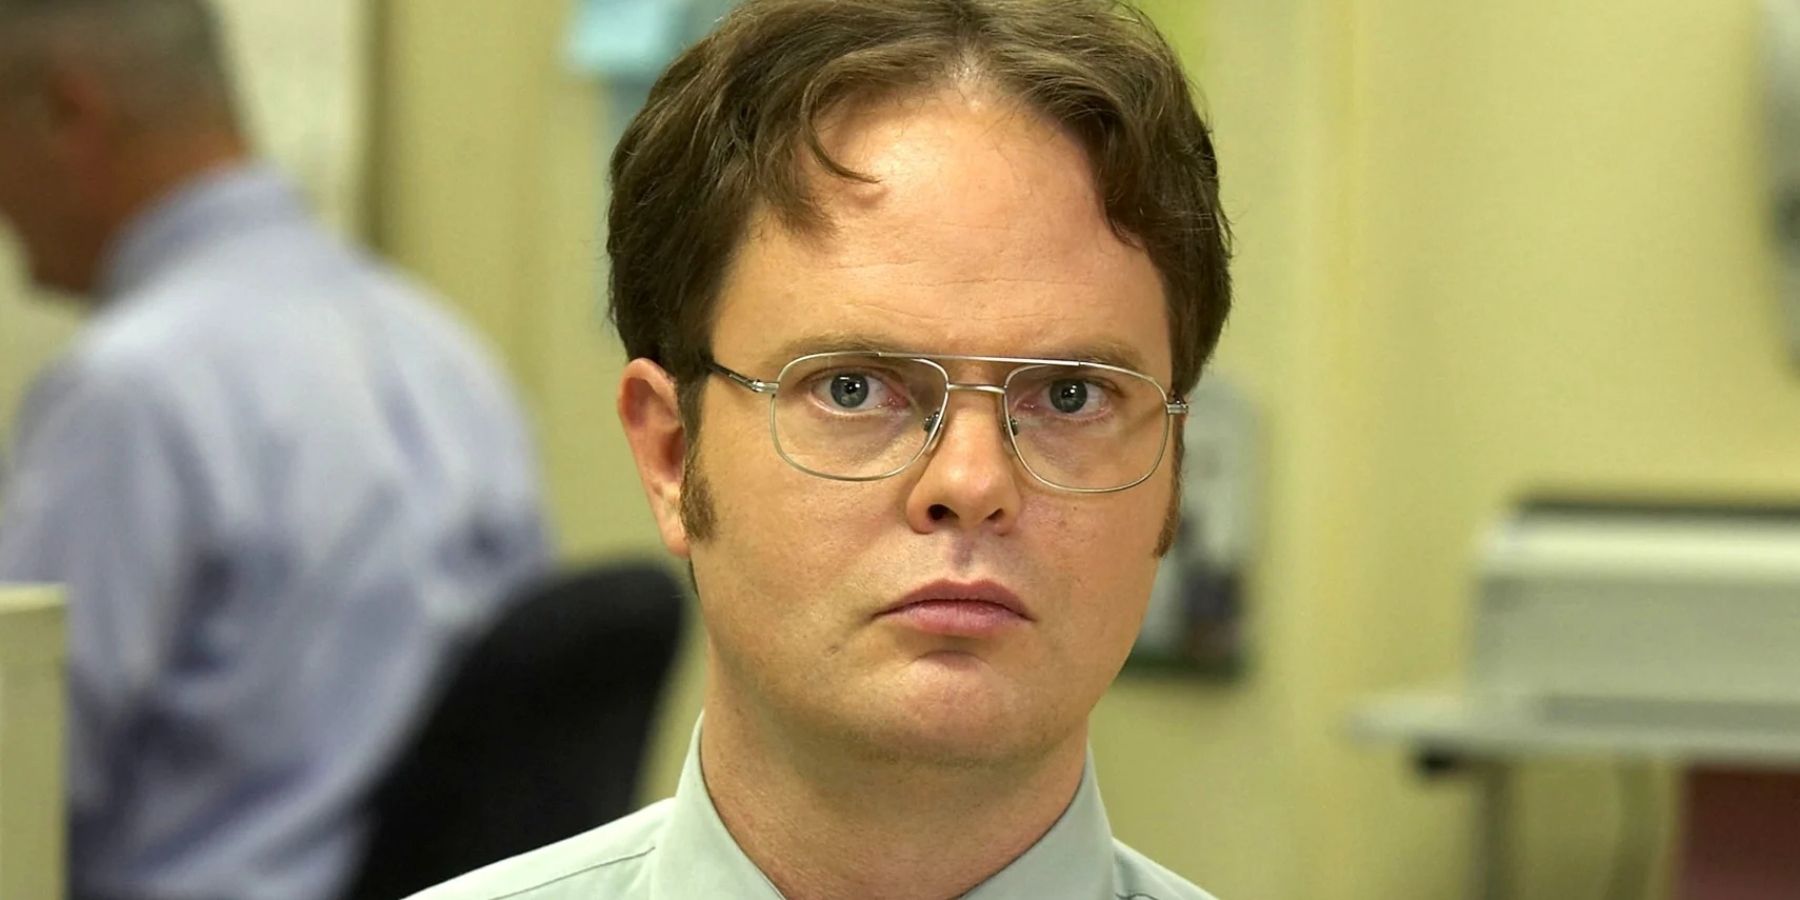 Dwight Schrute staring at the camera in The Office